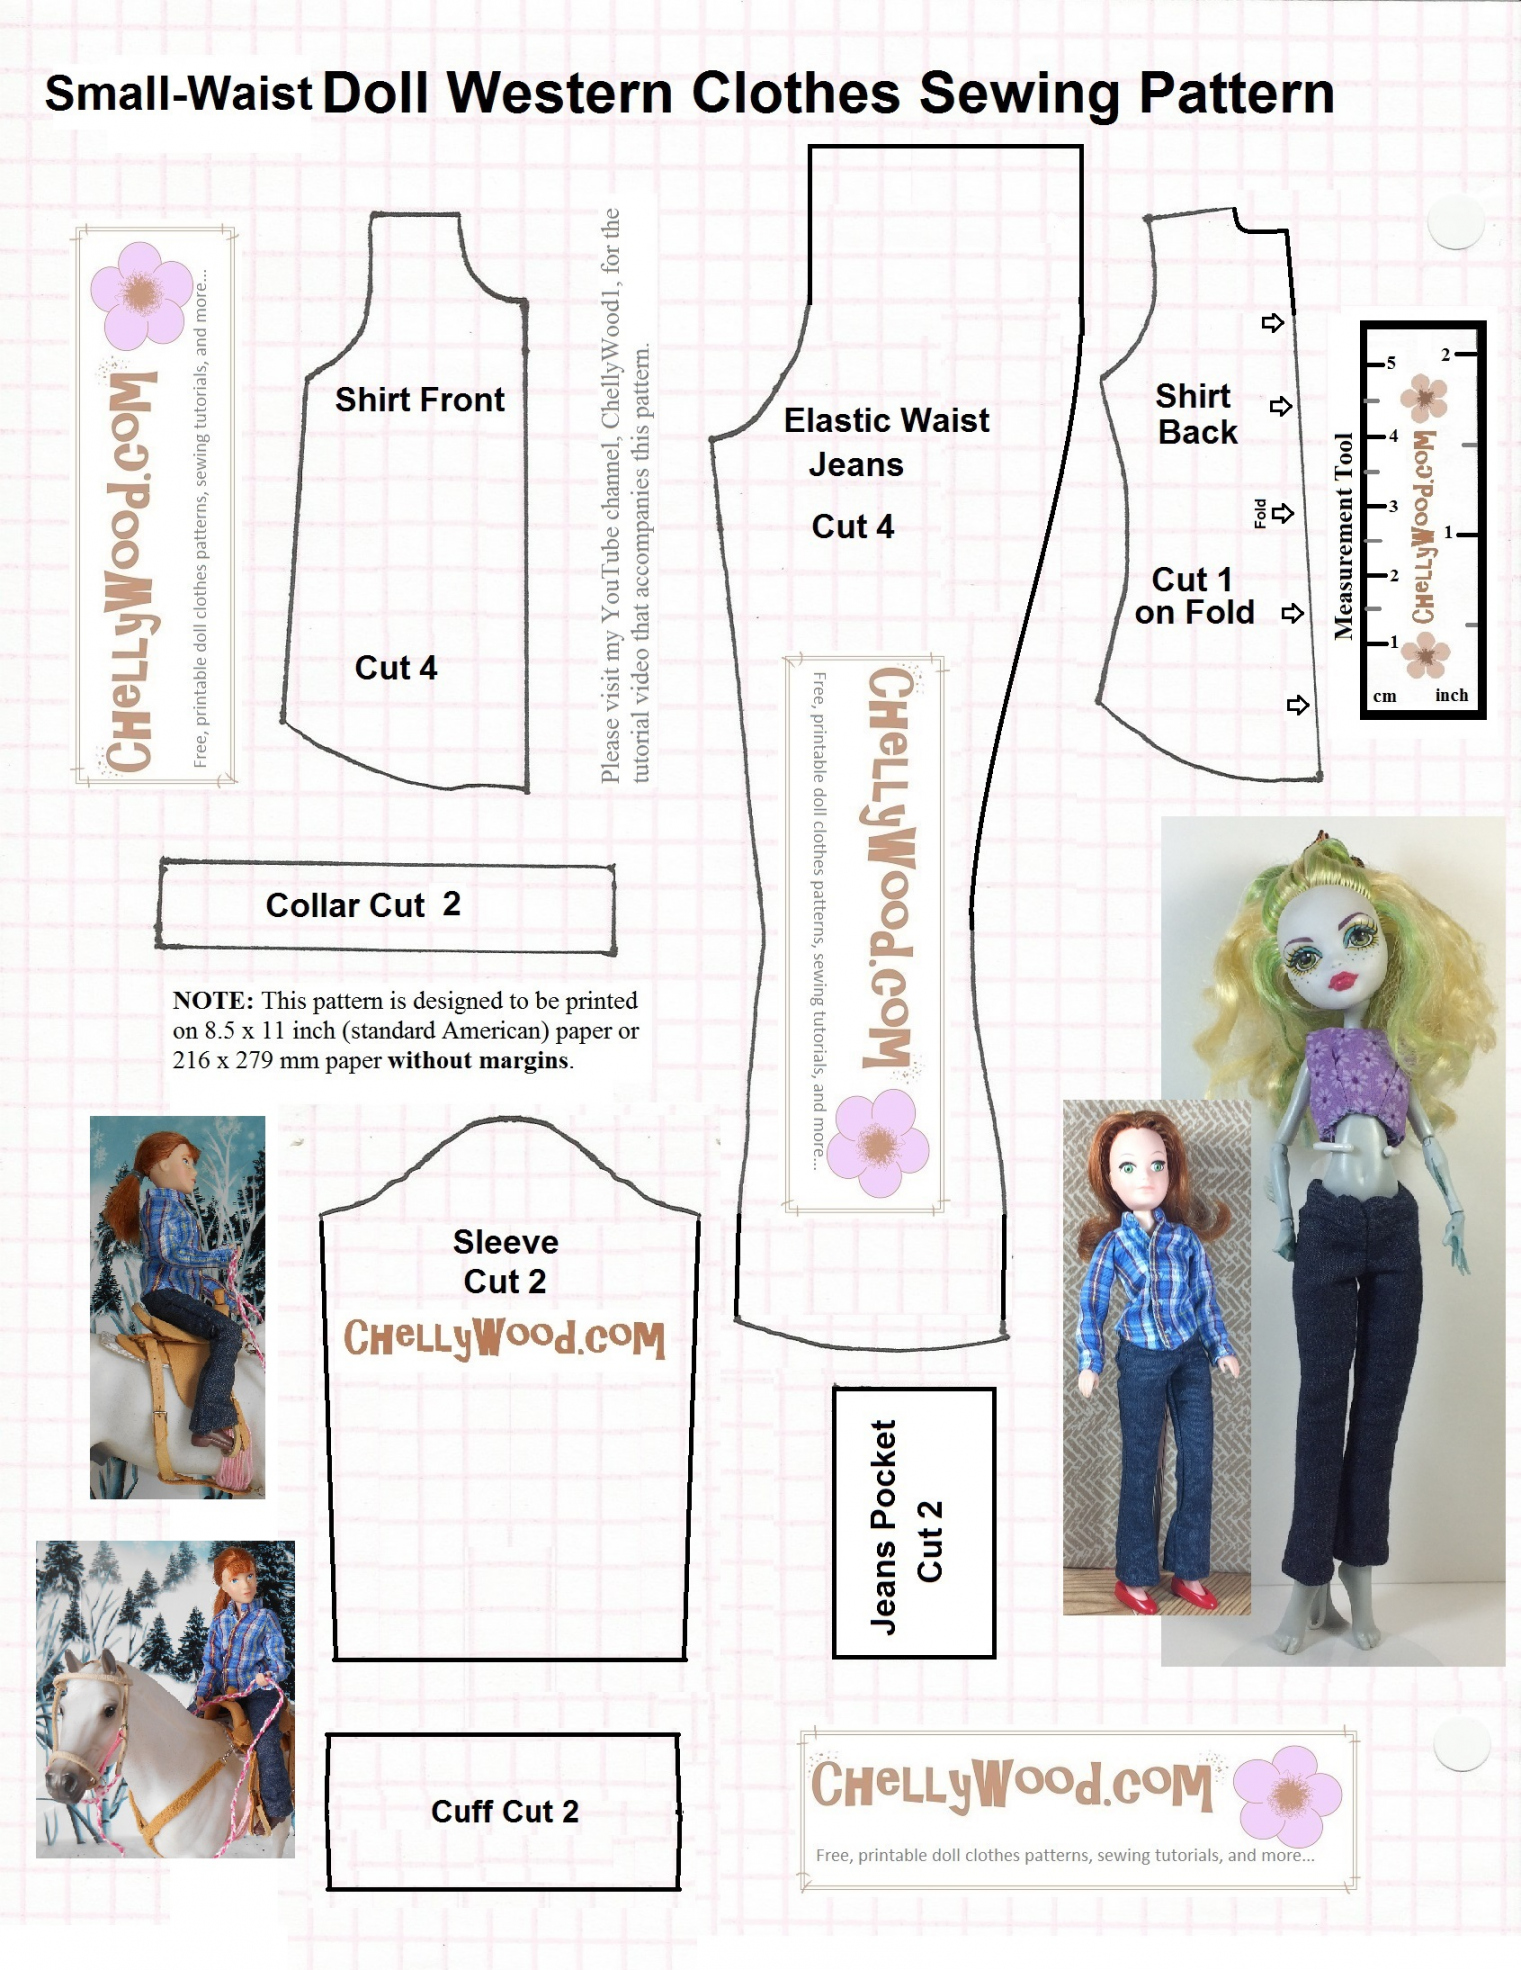 Monster High Doll Clothes Sewing Patterns are FREE @ ChellyWood